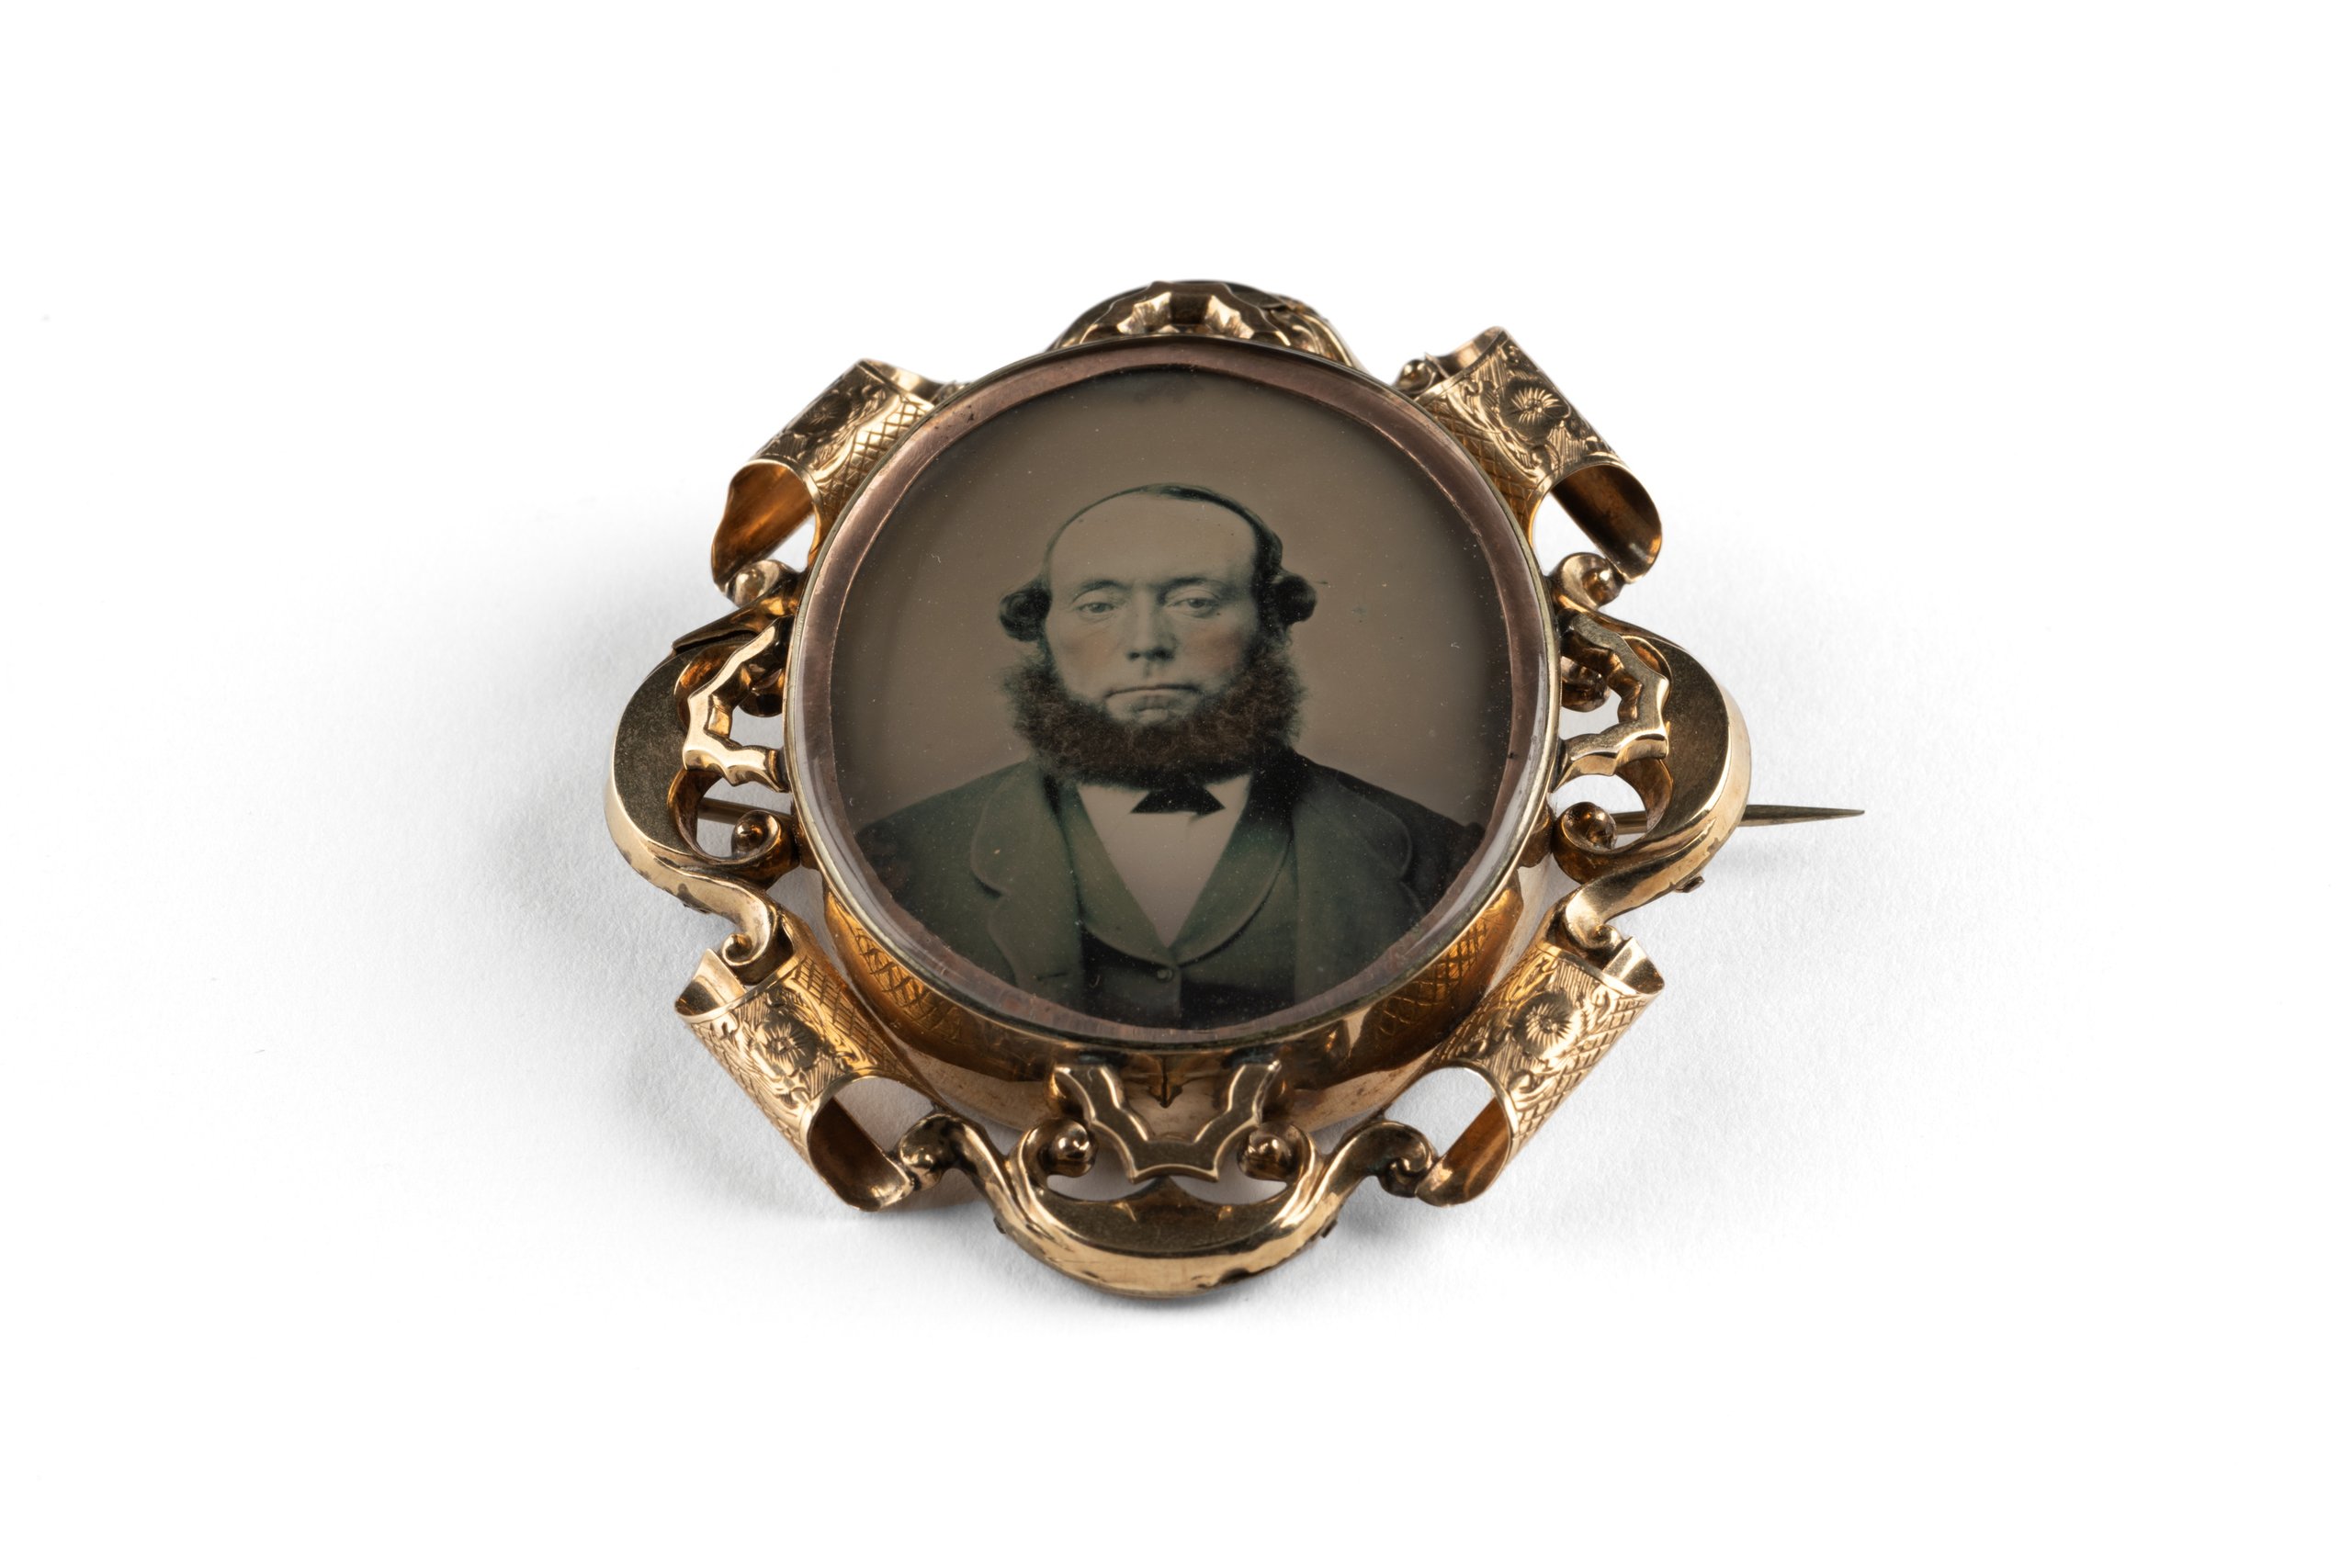 Mourning brooch with portrait of Captain R J Miller